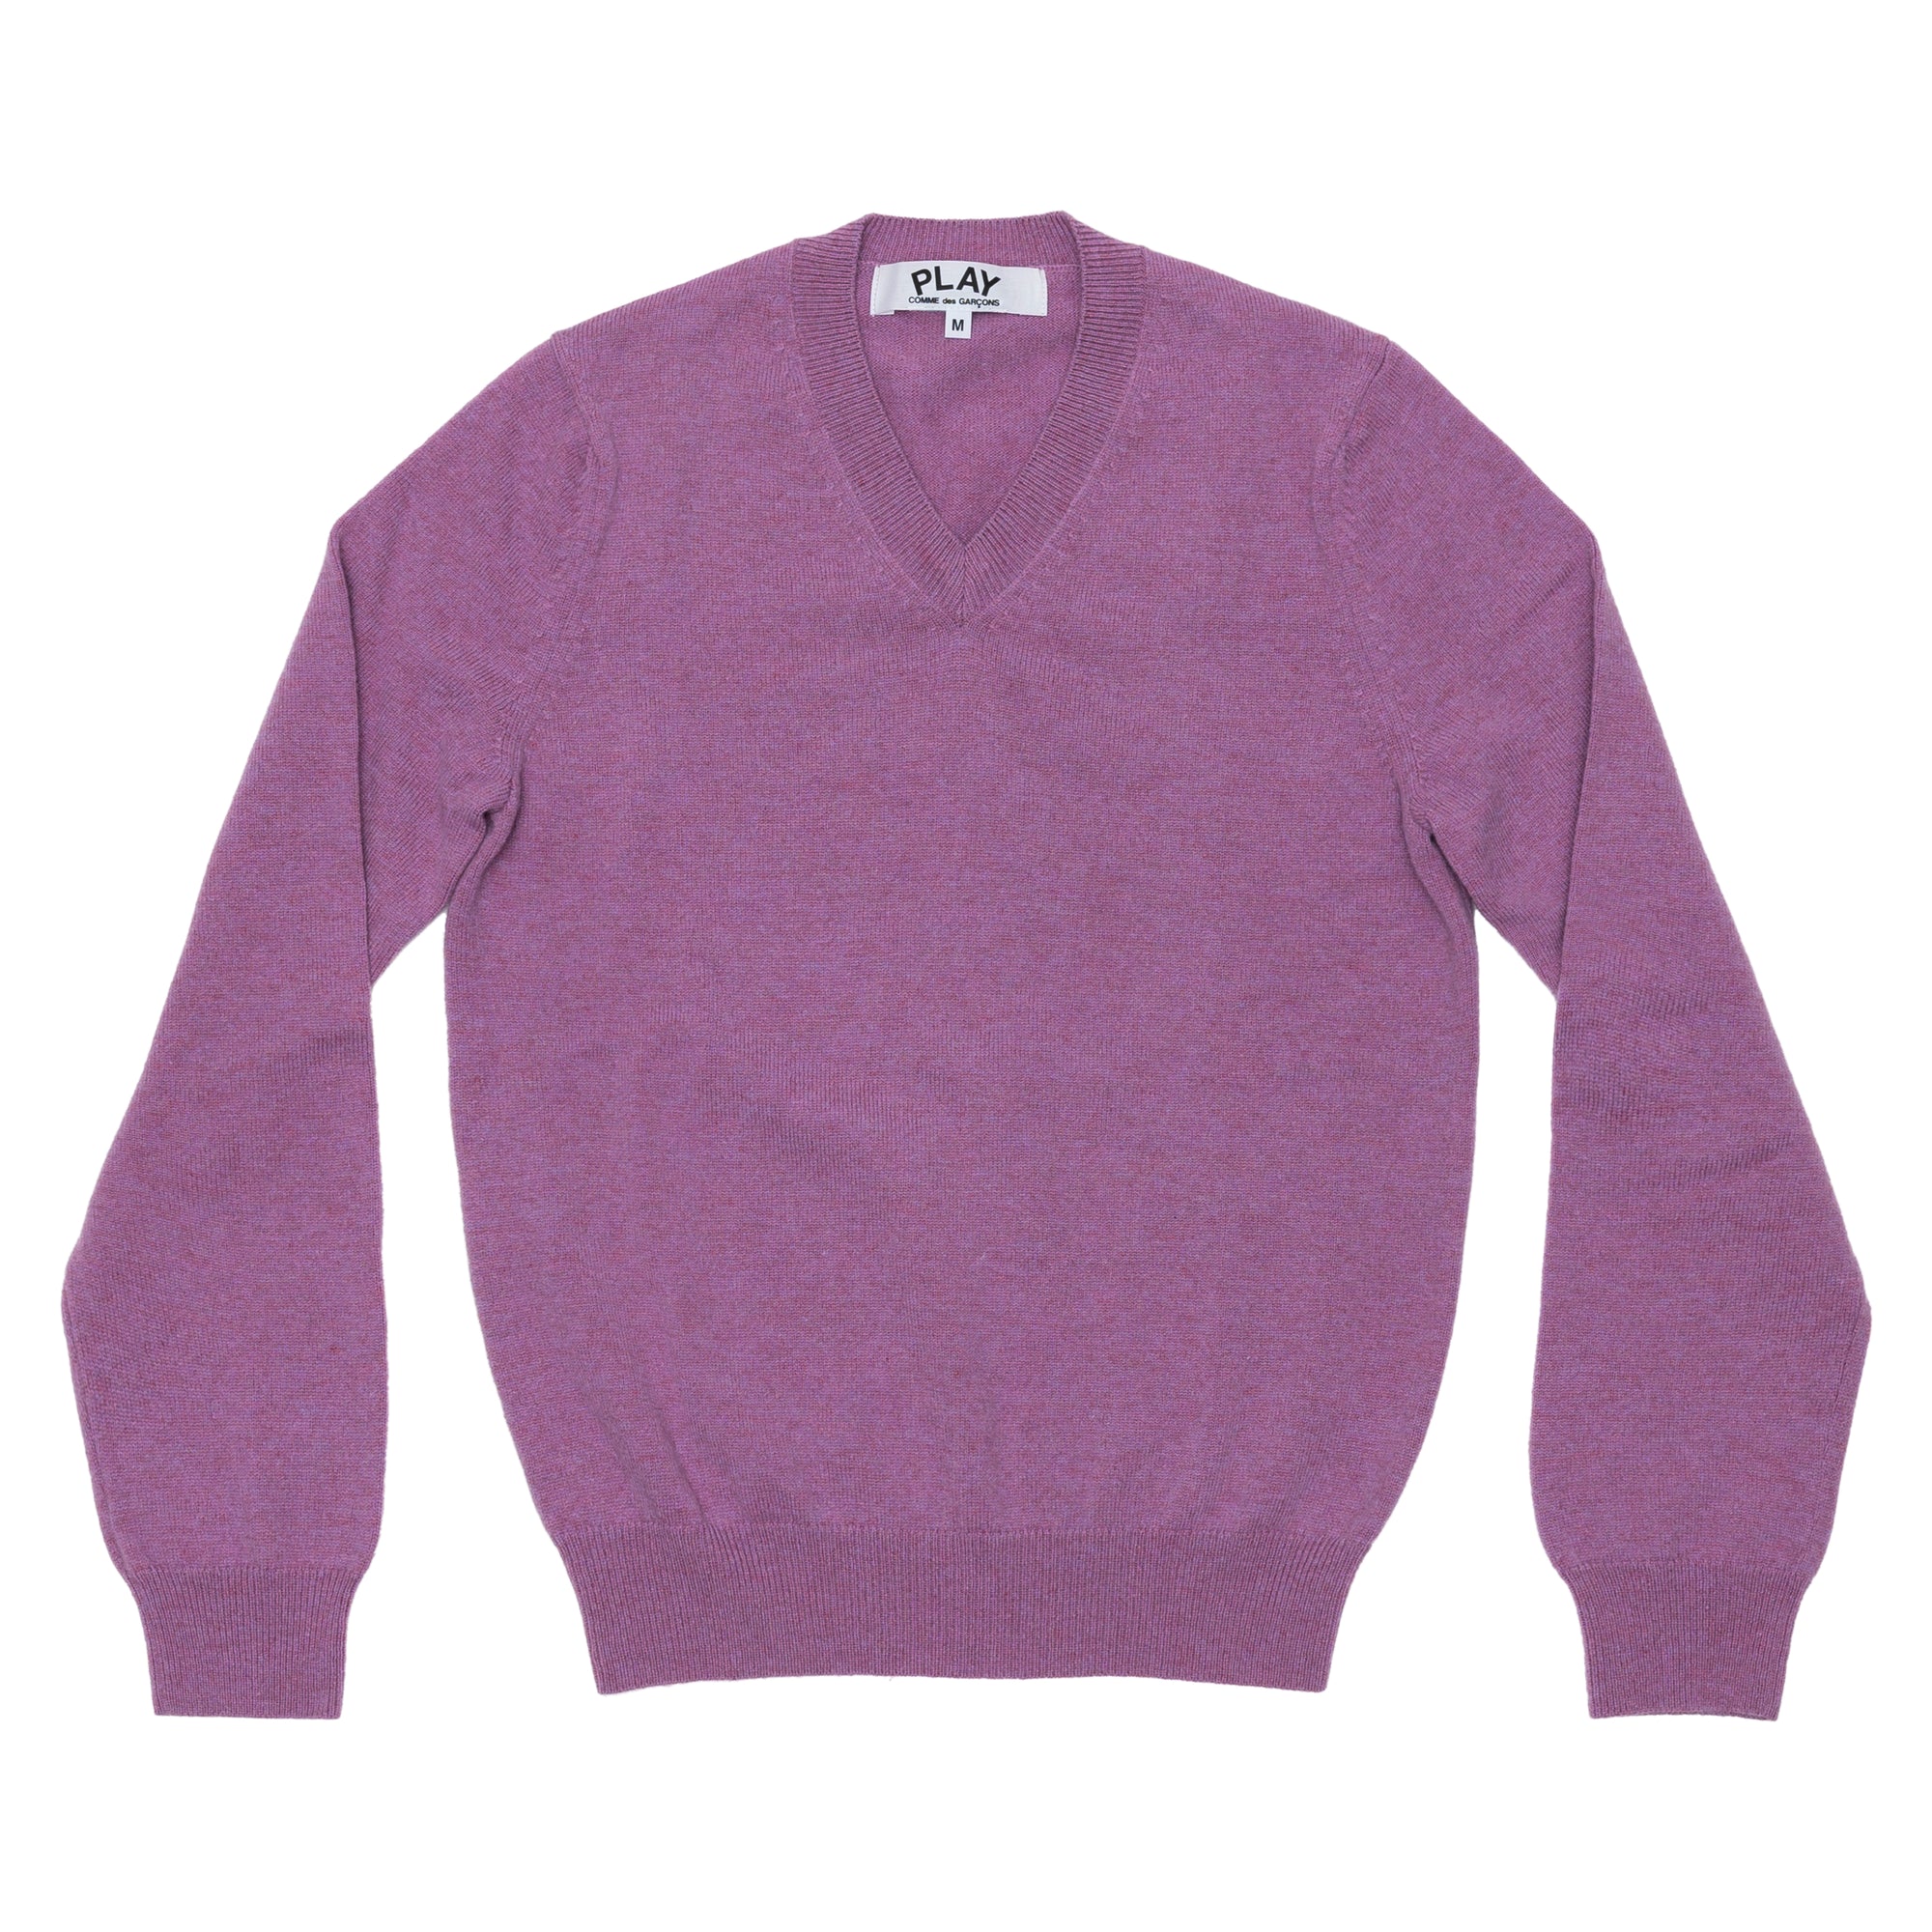 PLAY CDG  - Top Dyed Carded Lambswool V Neck Sweater - (Purple) view 1